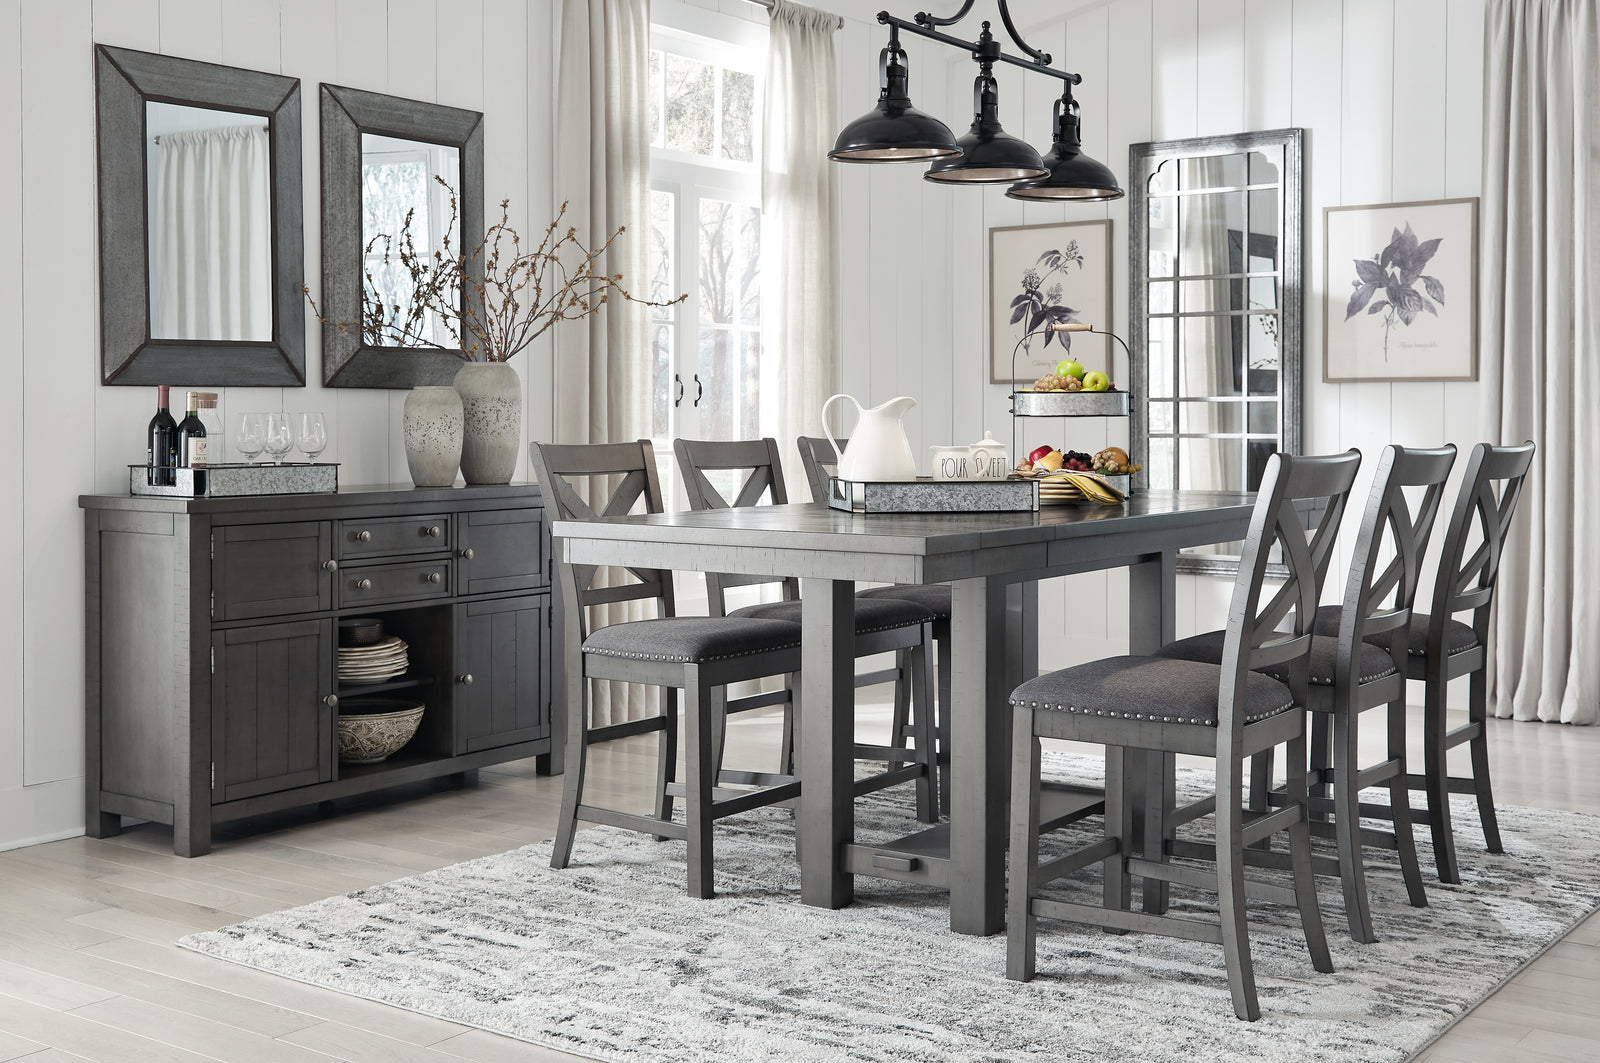 Myshanna Gray Counter Height Dining Table And 6 Barstools With Storage